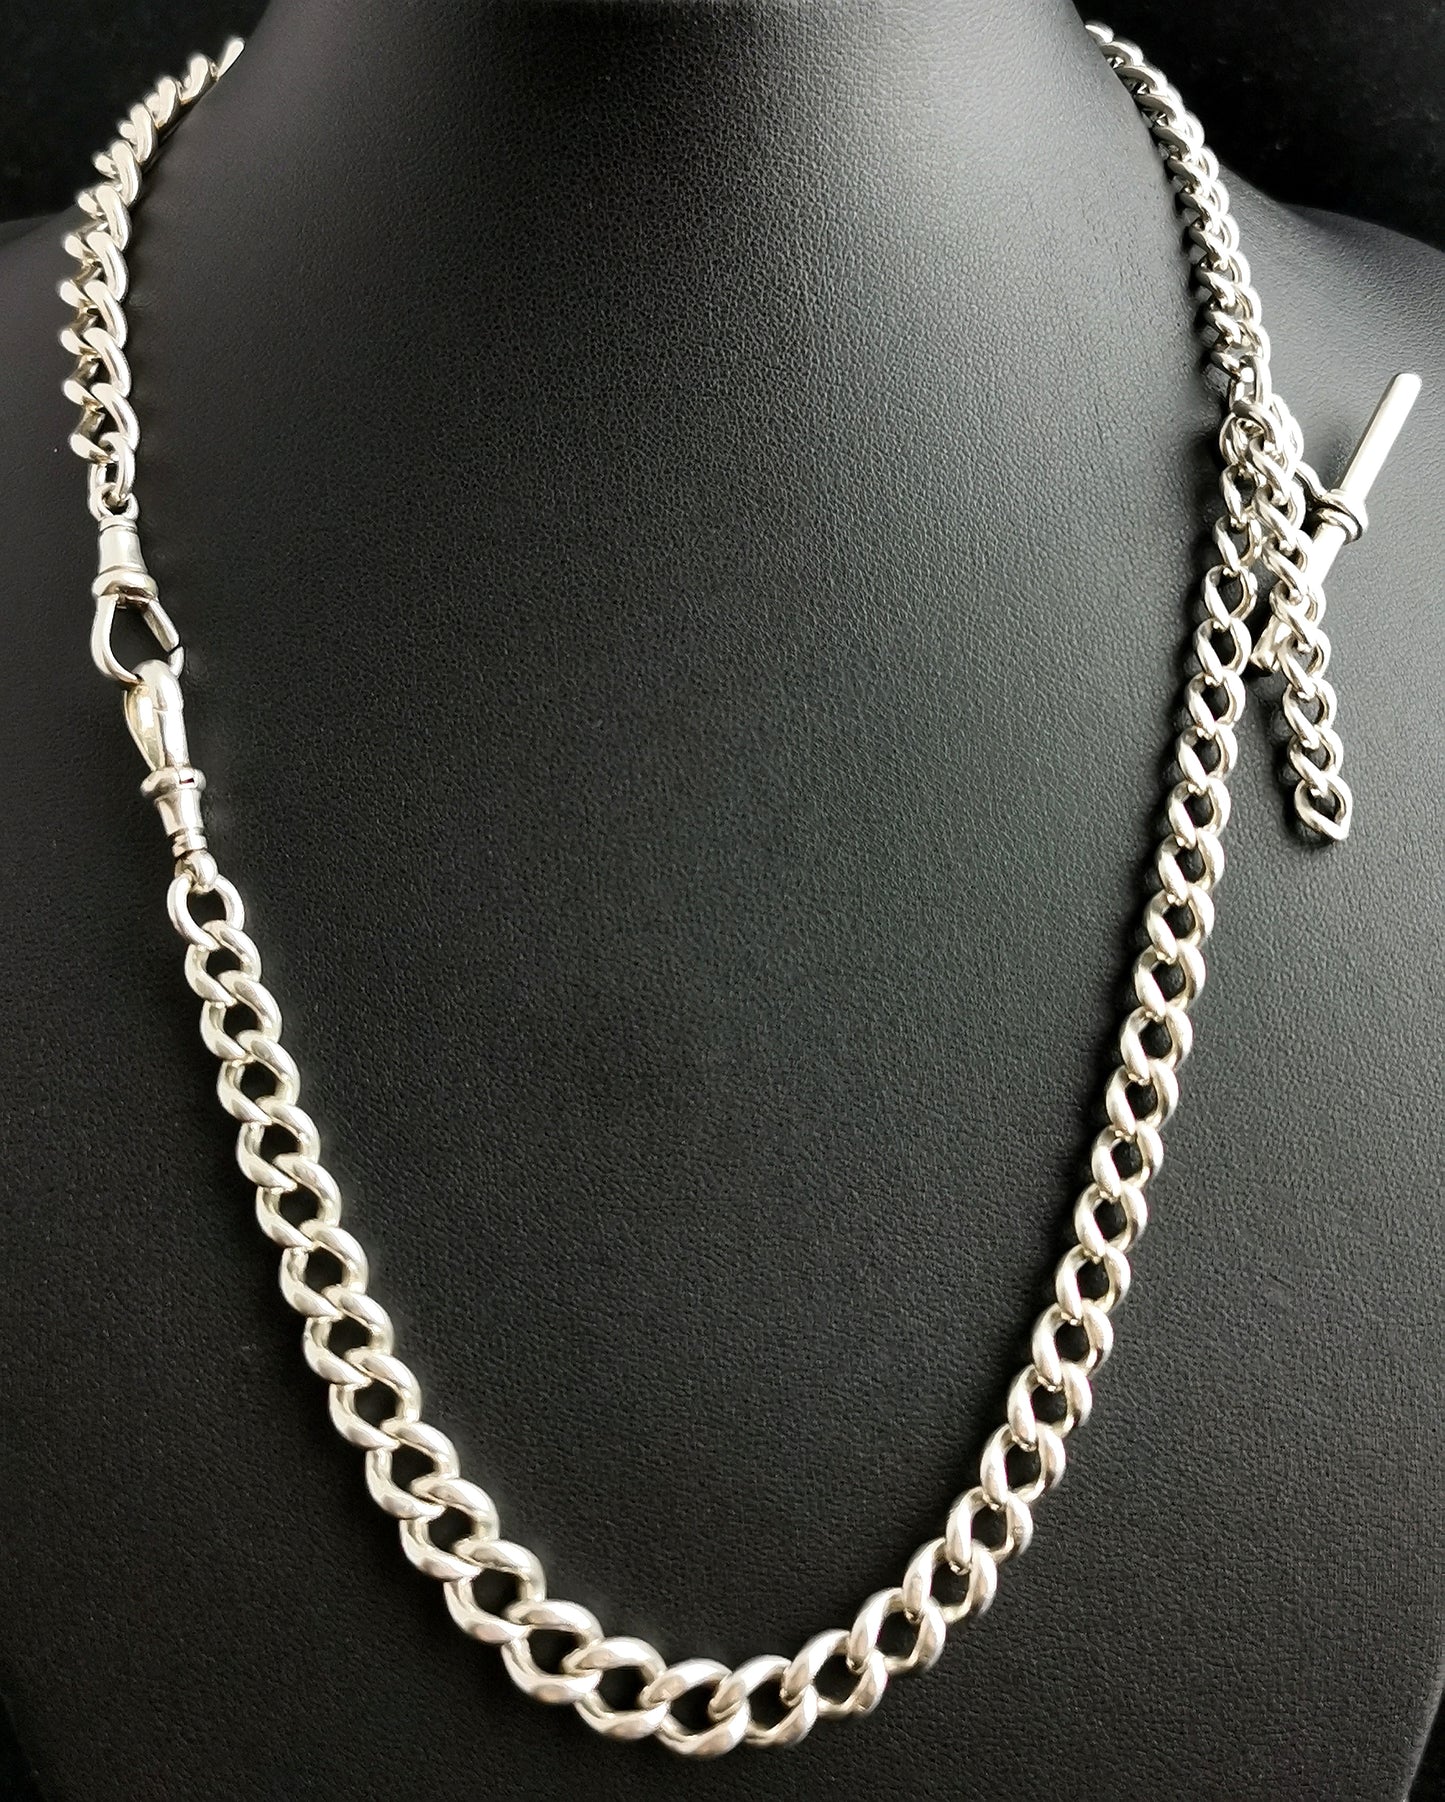 Antique silver Double Albert chain, watch chain necklace, heavy